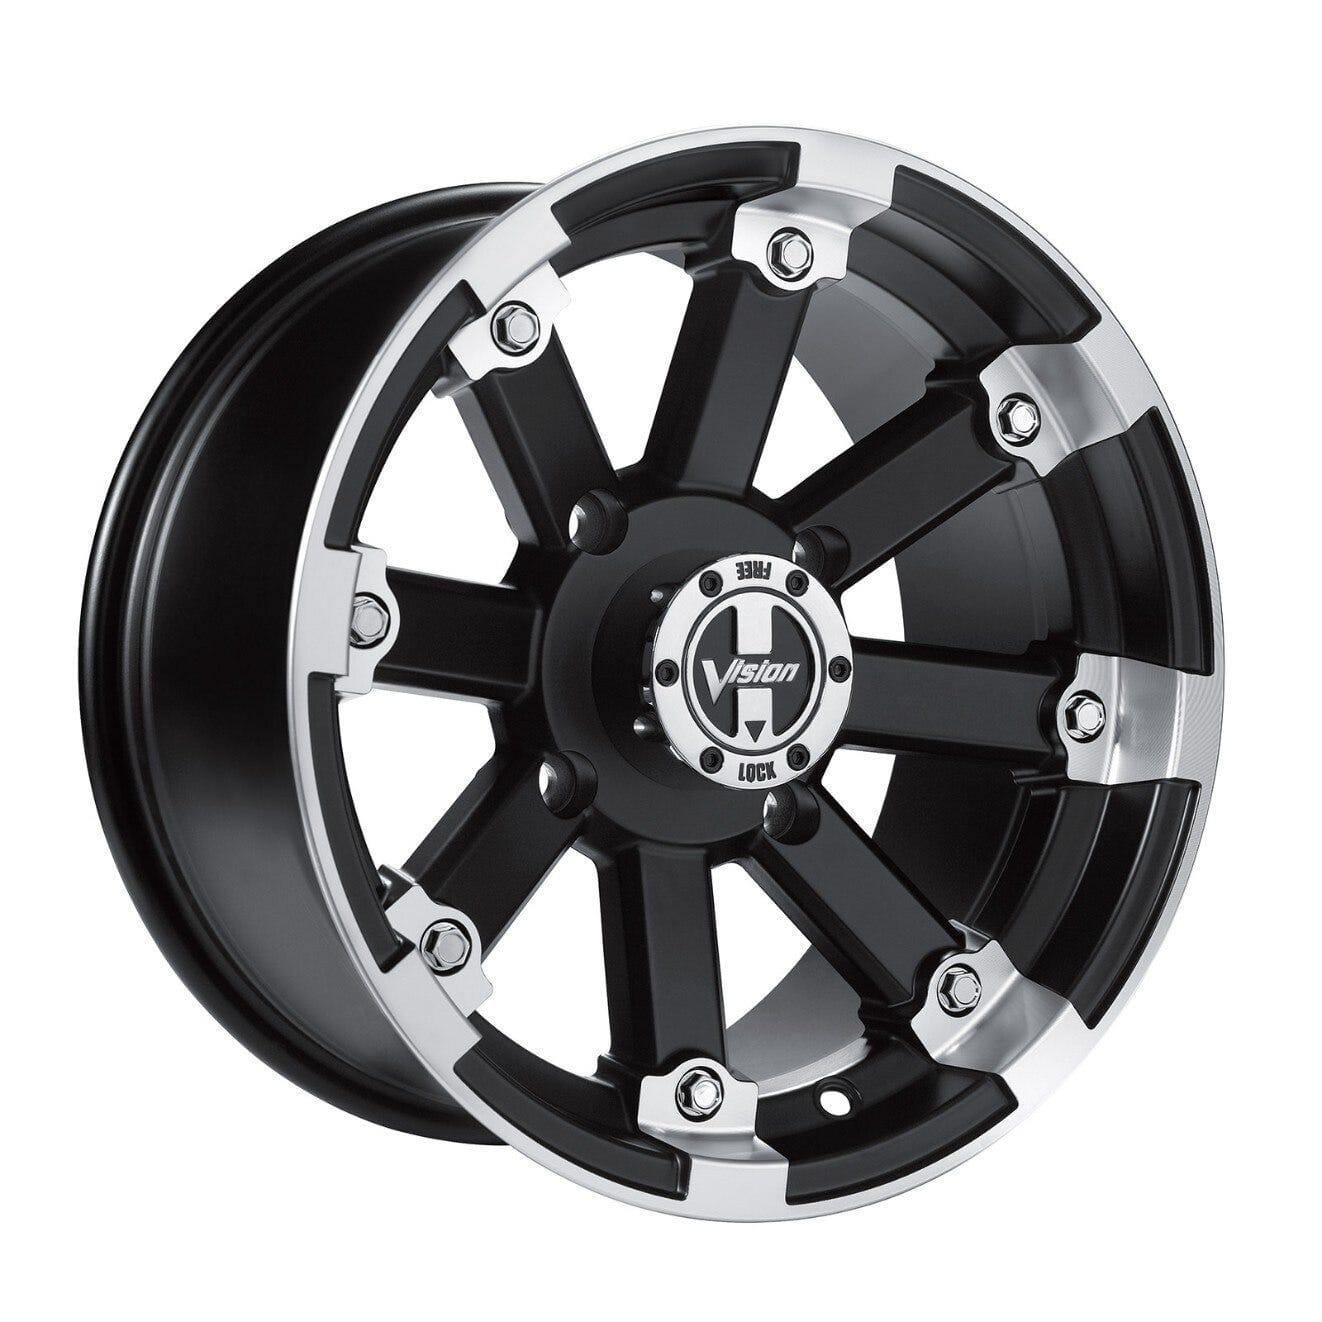 Lockout 393 14 in. Rim by Vision - Front - Propowersports.ca